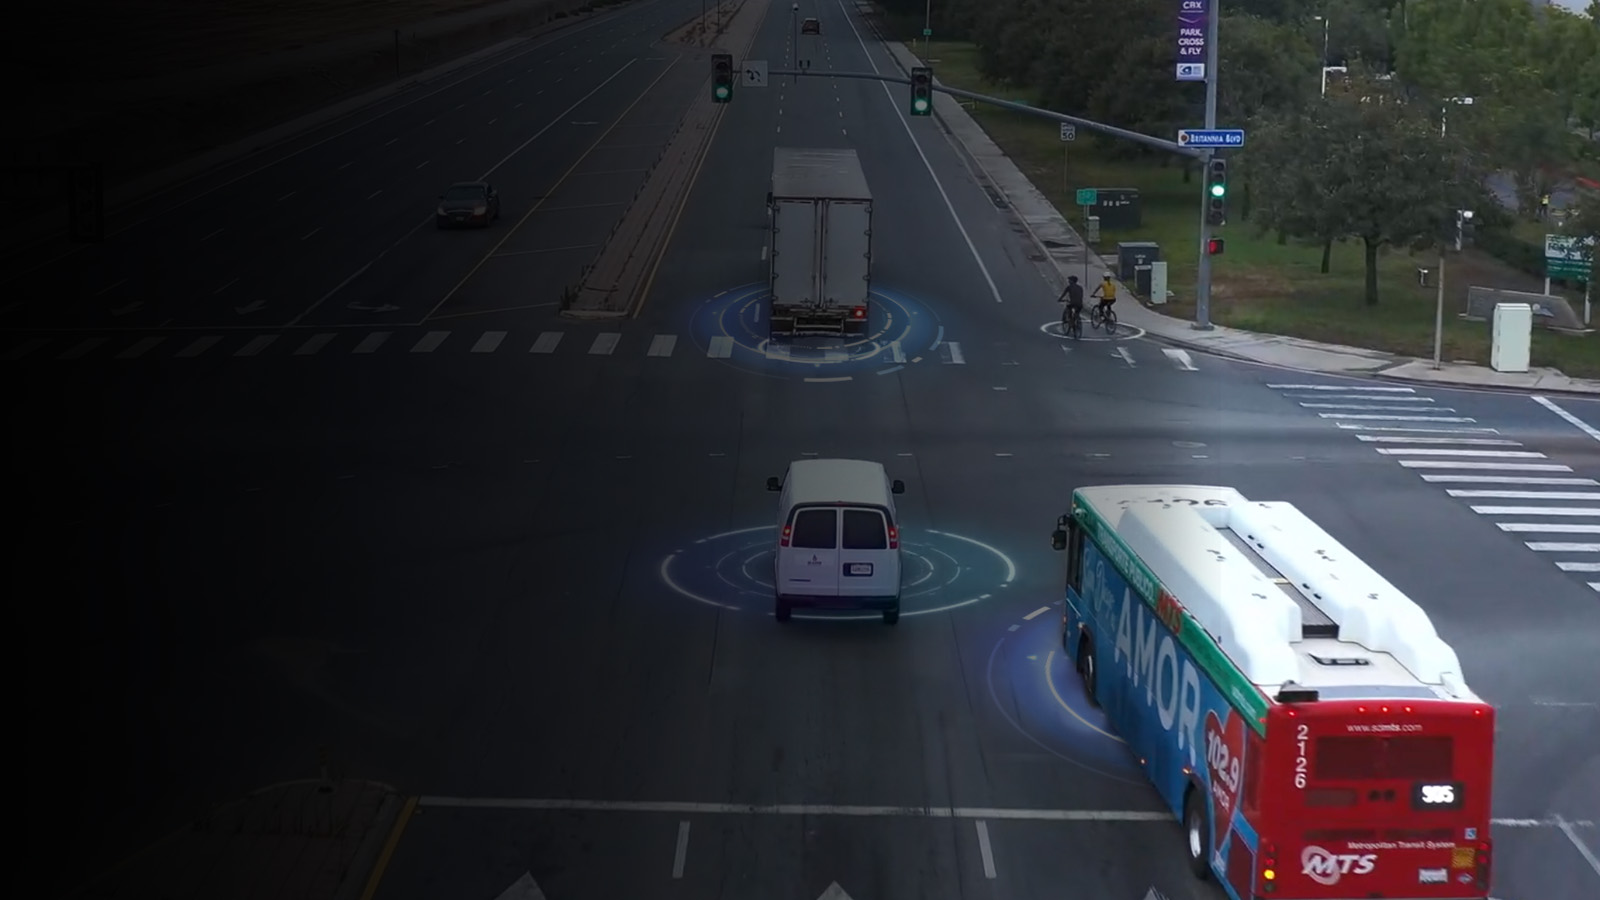 Commercial vehicles driving through a lighted intersection